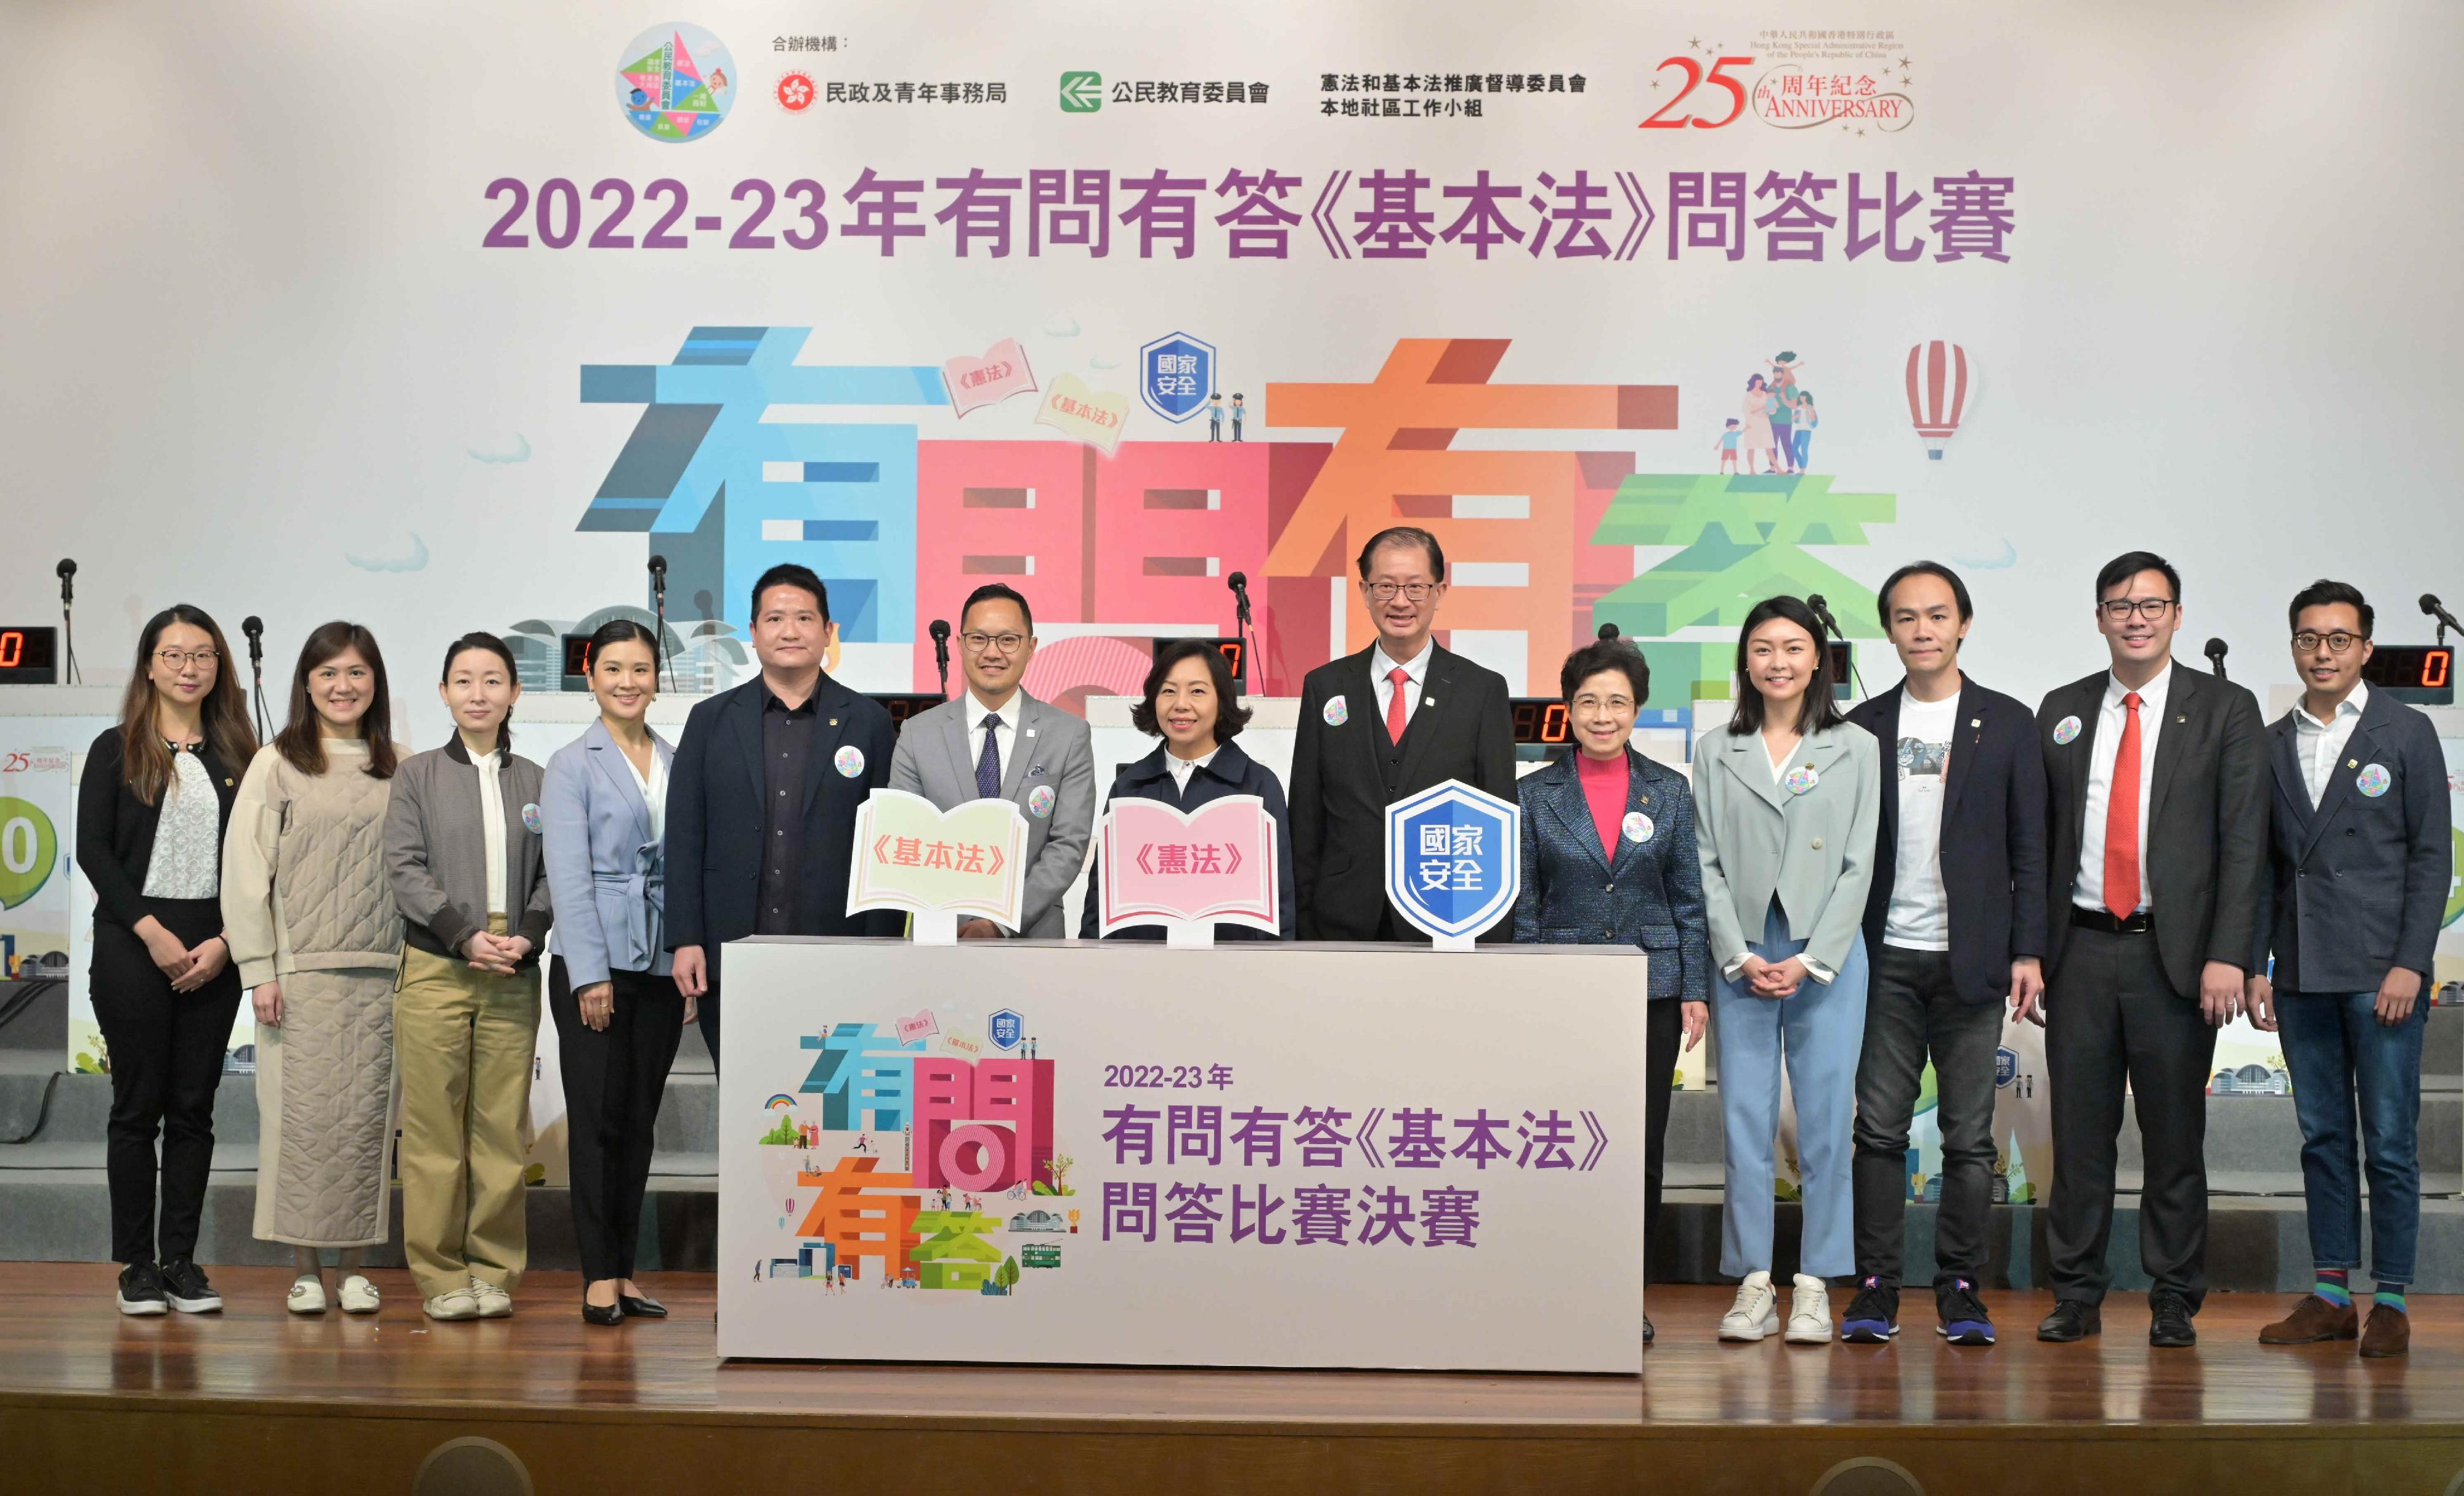 The Secretary for Home and Youth Affairs, Miss Alice Mak (centre); the Chairperson of the Committee on the Promotion of Civic Education (CPCE) and the Convenor of the Working Group on Local Community under the Constitution and Basic Law Promotion Steering Committee, Mr Stanley Choi (sixth left); and the Convenor of the 2022-23 National Education Sub-committee of the CPCE, Mr Henry Tong (sixth right), are pictured with  other guests at the Basic Law Quiz Competition Final and Prize Presentation Ceremony today (March 11).
